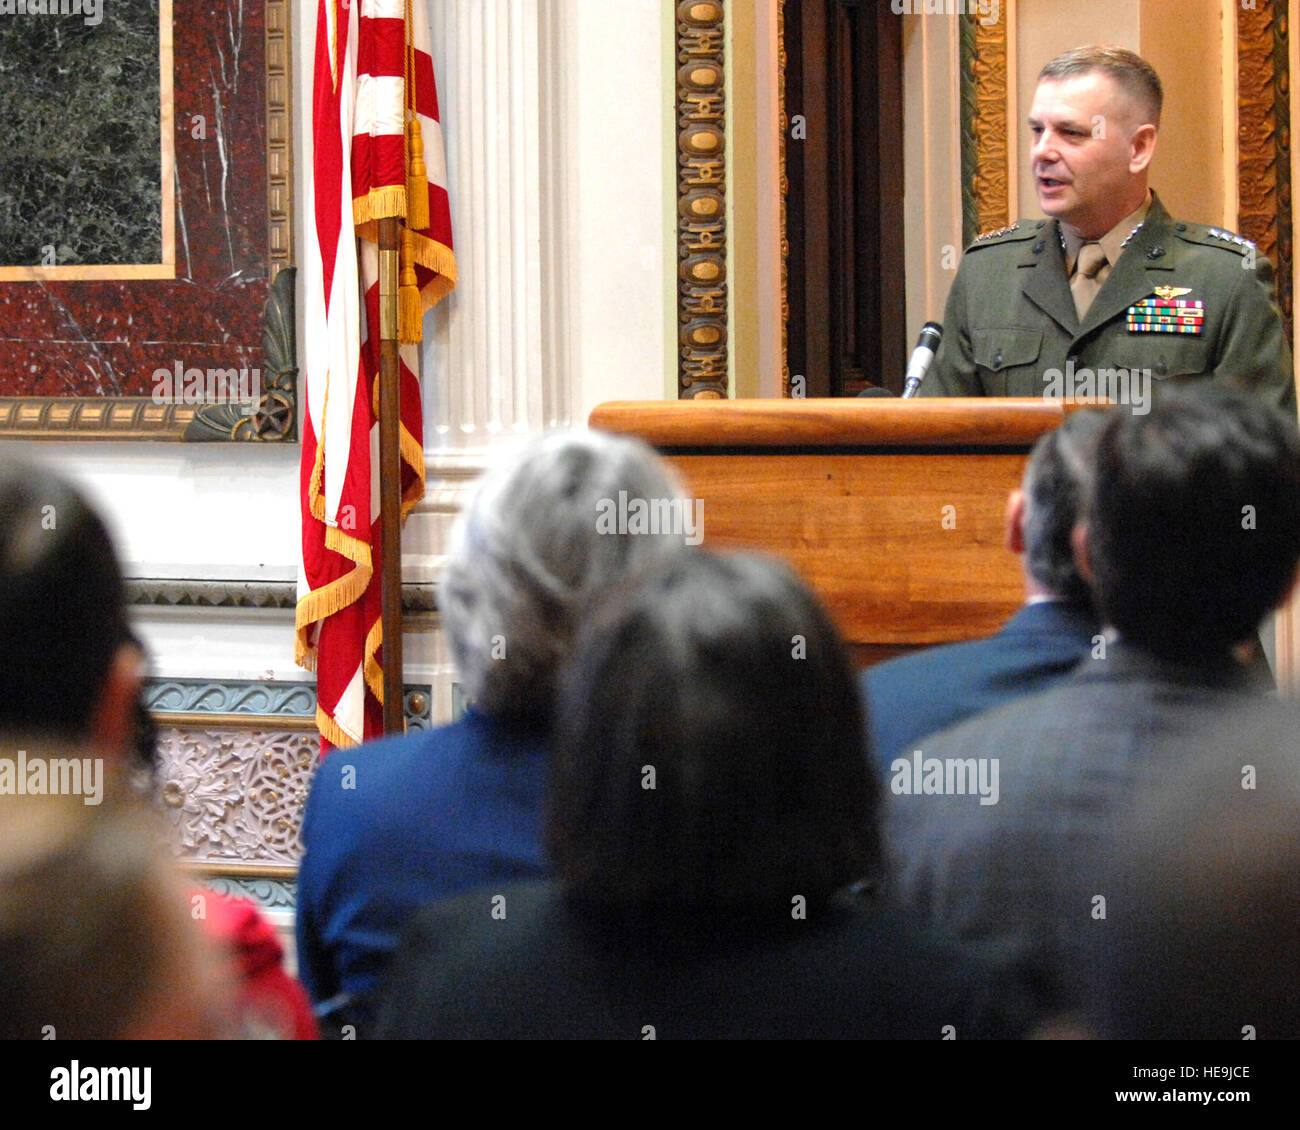 Vice Chairman of the Joint Chiefs of Staff Marine Gen. James Cartwright speaks to the audience at the USA Freedom Corps President's Volunteer Service Awards presentation May 16, 2008, at the Eisenhower Executive Office Building in Washington. Cartwright, President's Council on Service and Civic Participation member Mary Jo Myers, actor Stephen Baldwin and USA Freedom Corps director Henry Lozano presented the awards.  Air Force Tech. Sgt. Adam M. Stump. (Released) Stock Photo